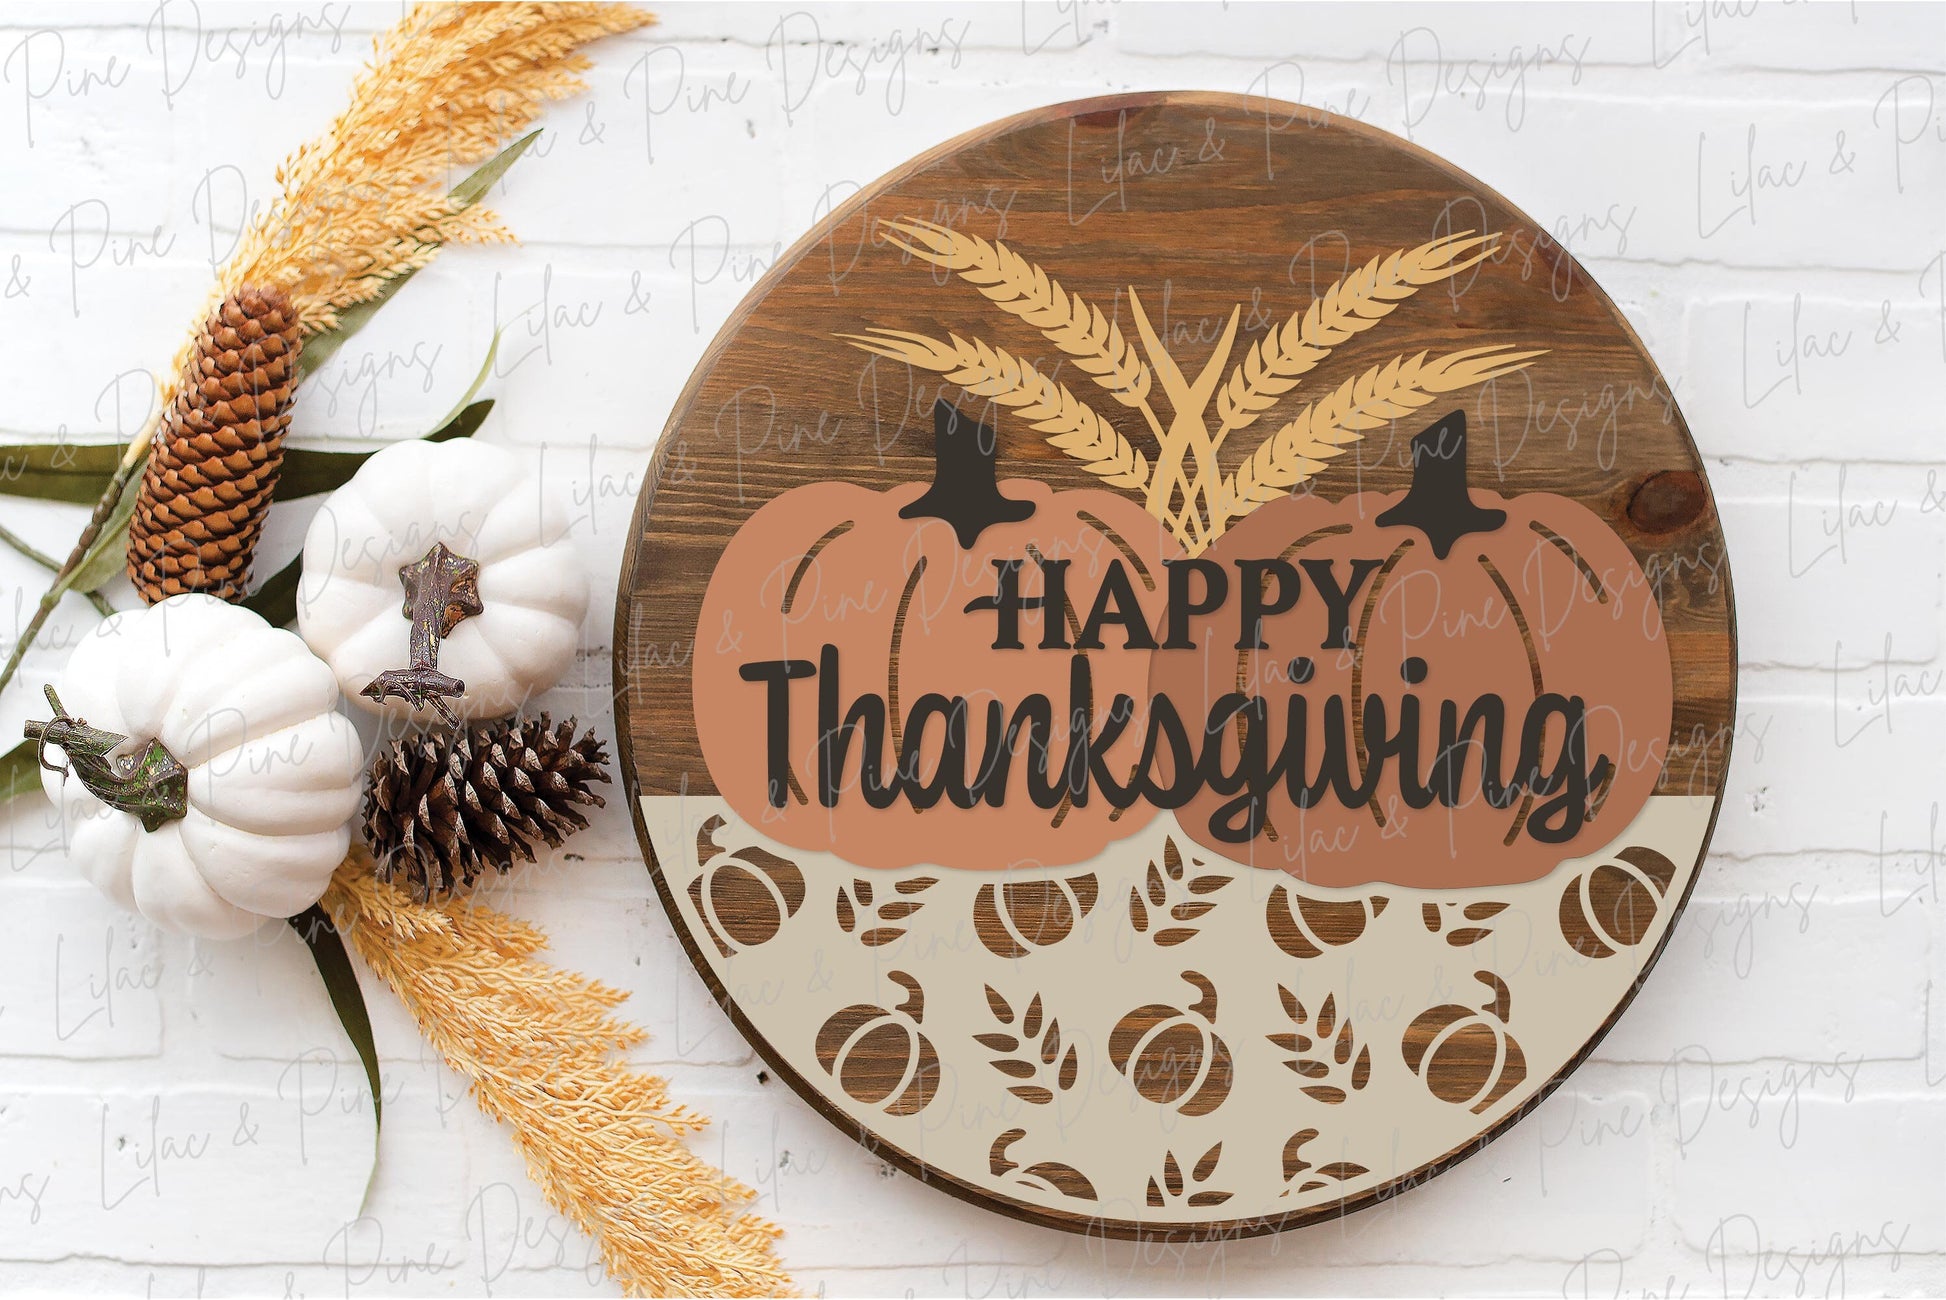 Happy Thanksgiving door hanger SVG, Wheat and Pumpkin sign SVG, Thanksgiving welcome sign, Thanksgiving decor, Glowforge SVG, laser cut file